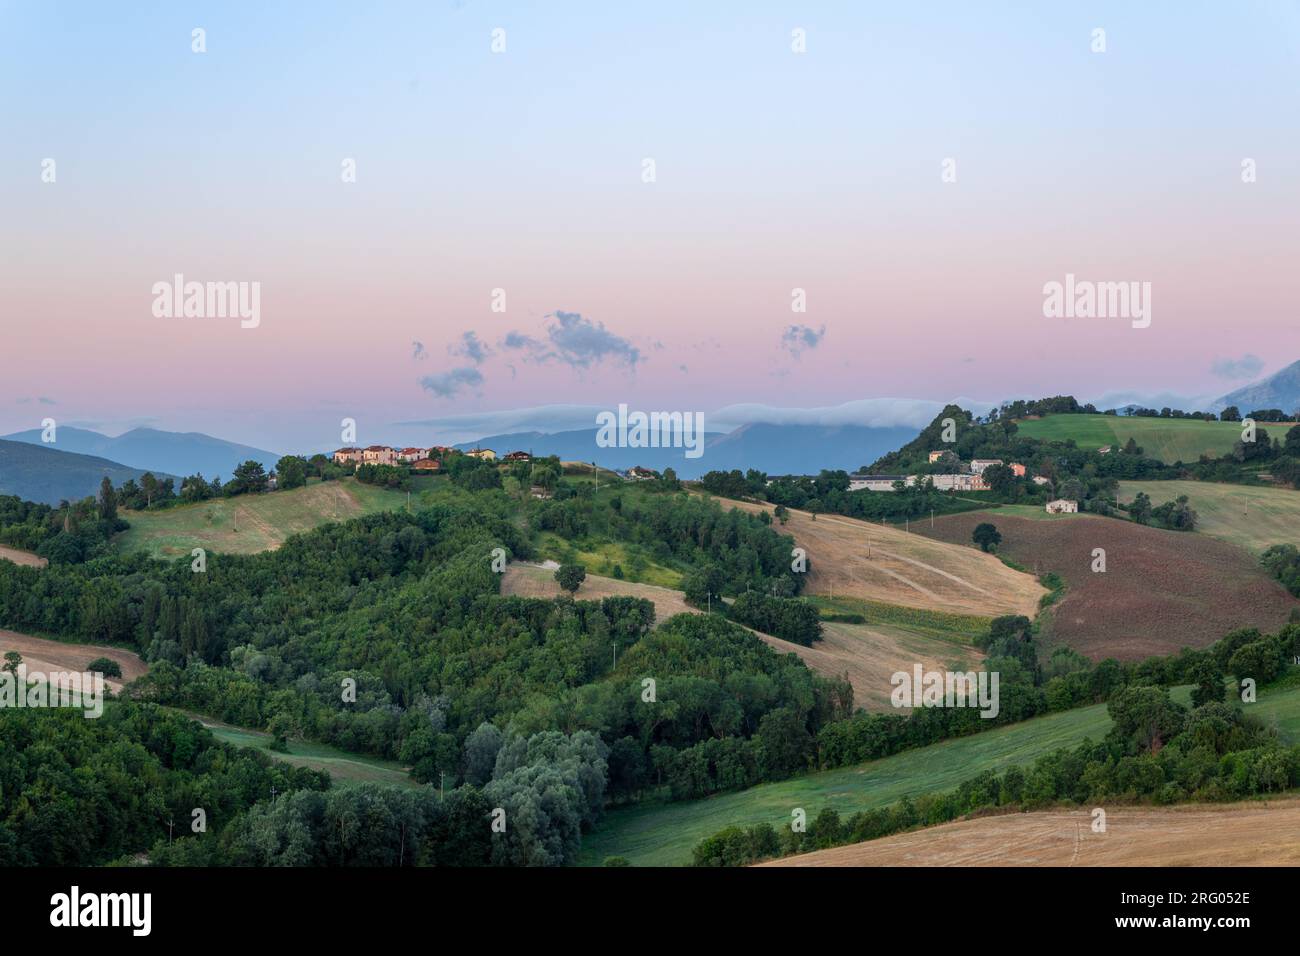 Sunrise over the hills of the village of Civitalba and Arcevia in the province of Ancona in the Marche region of Italy. Stock Photo